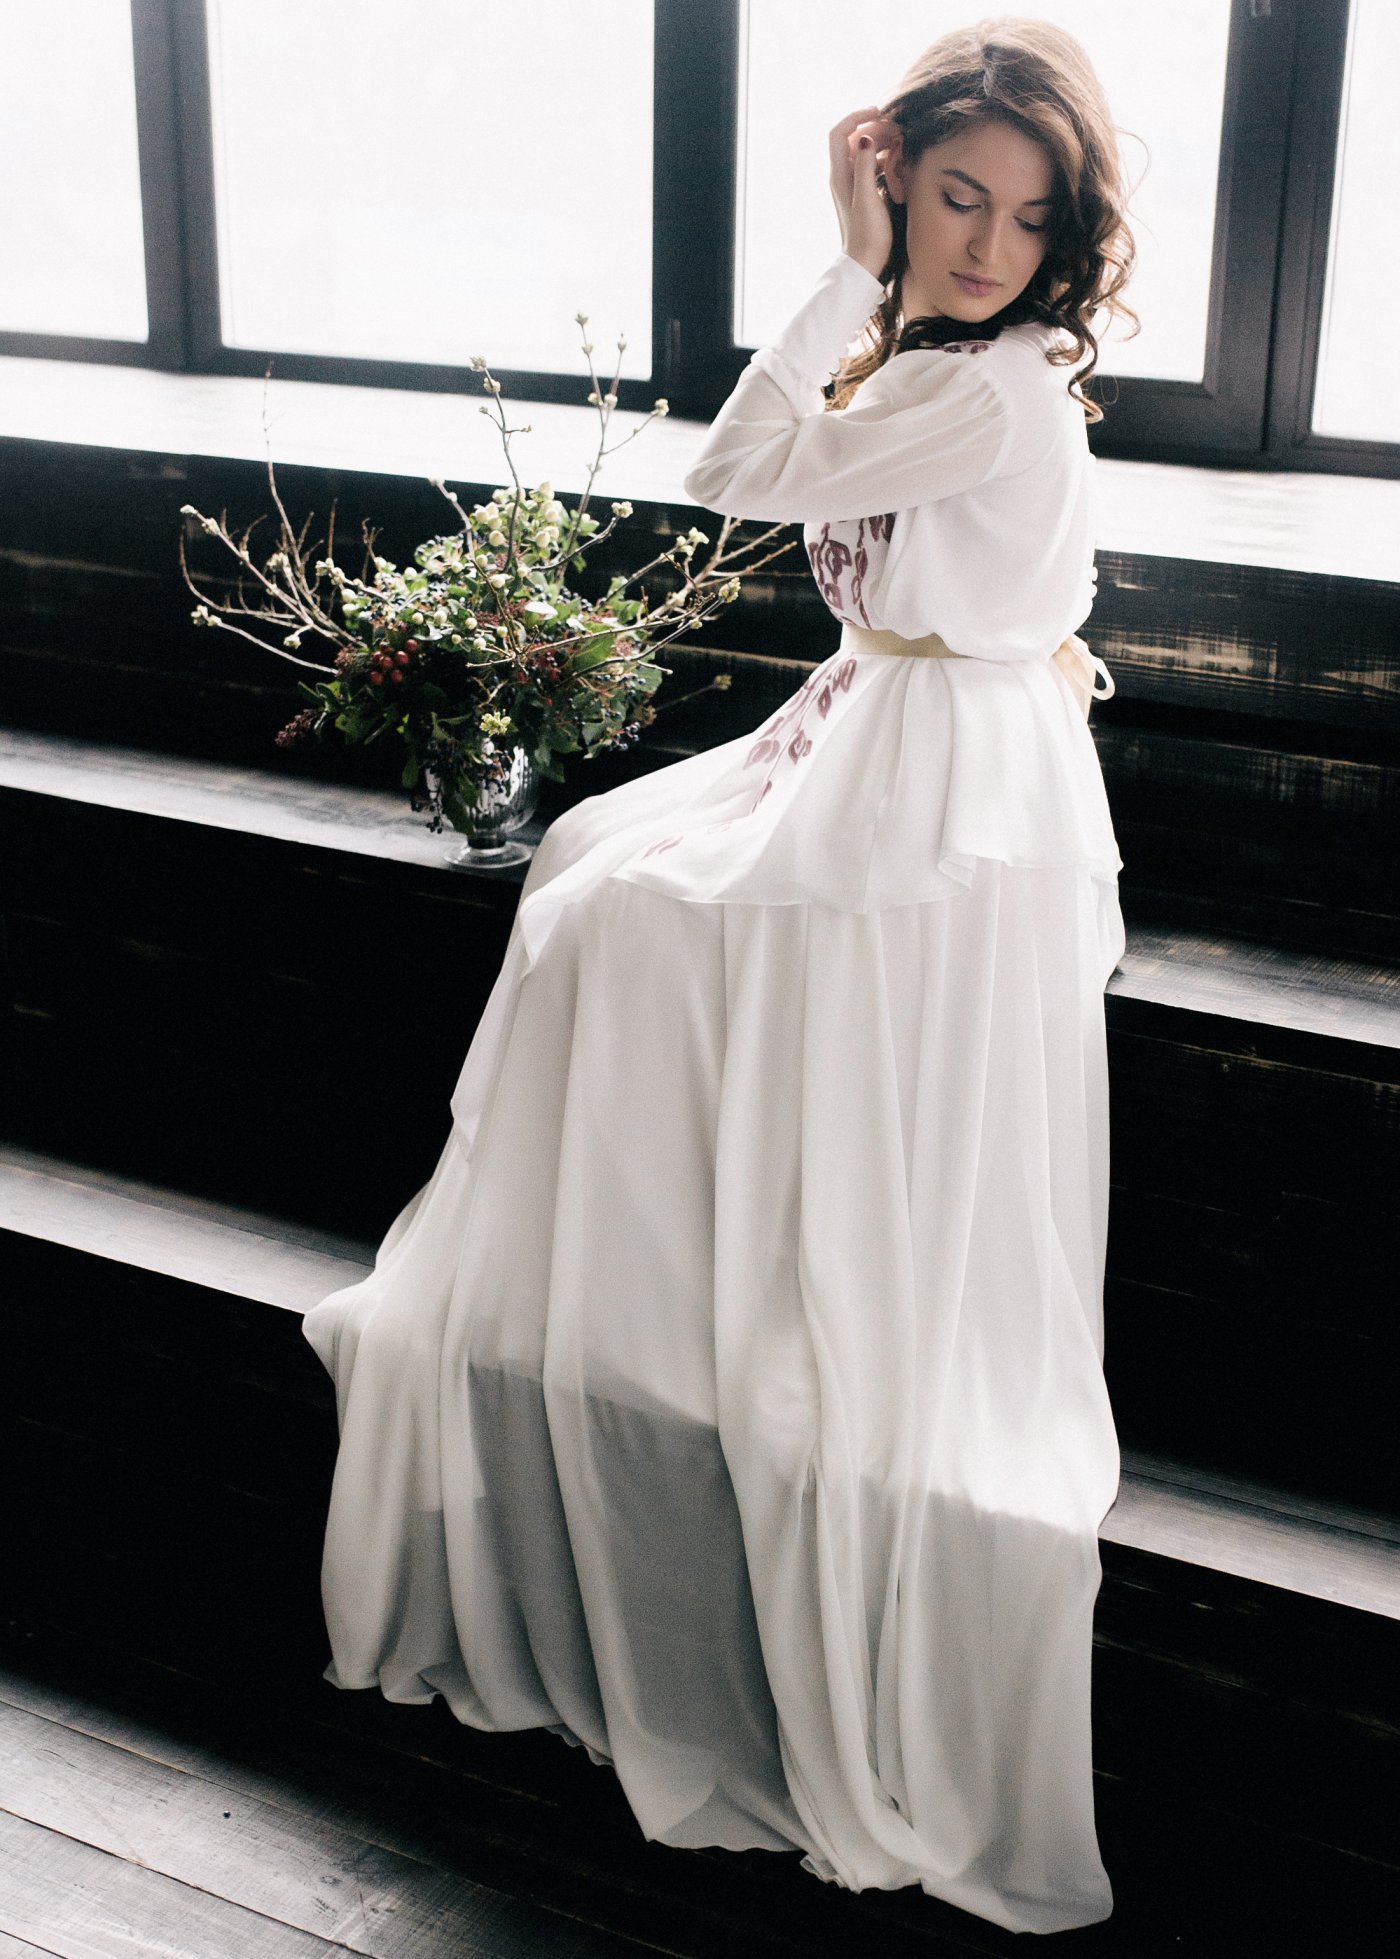 Off-white wedding dress with long bishop sleeve and layered skirt ...